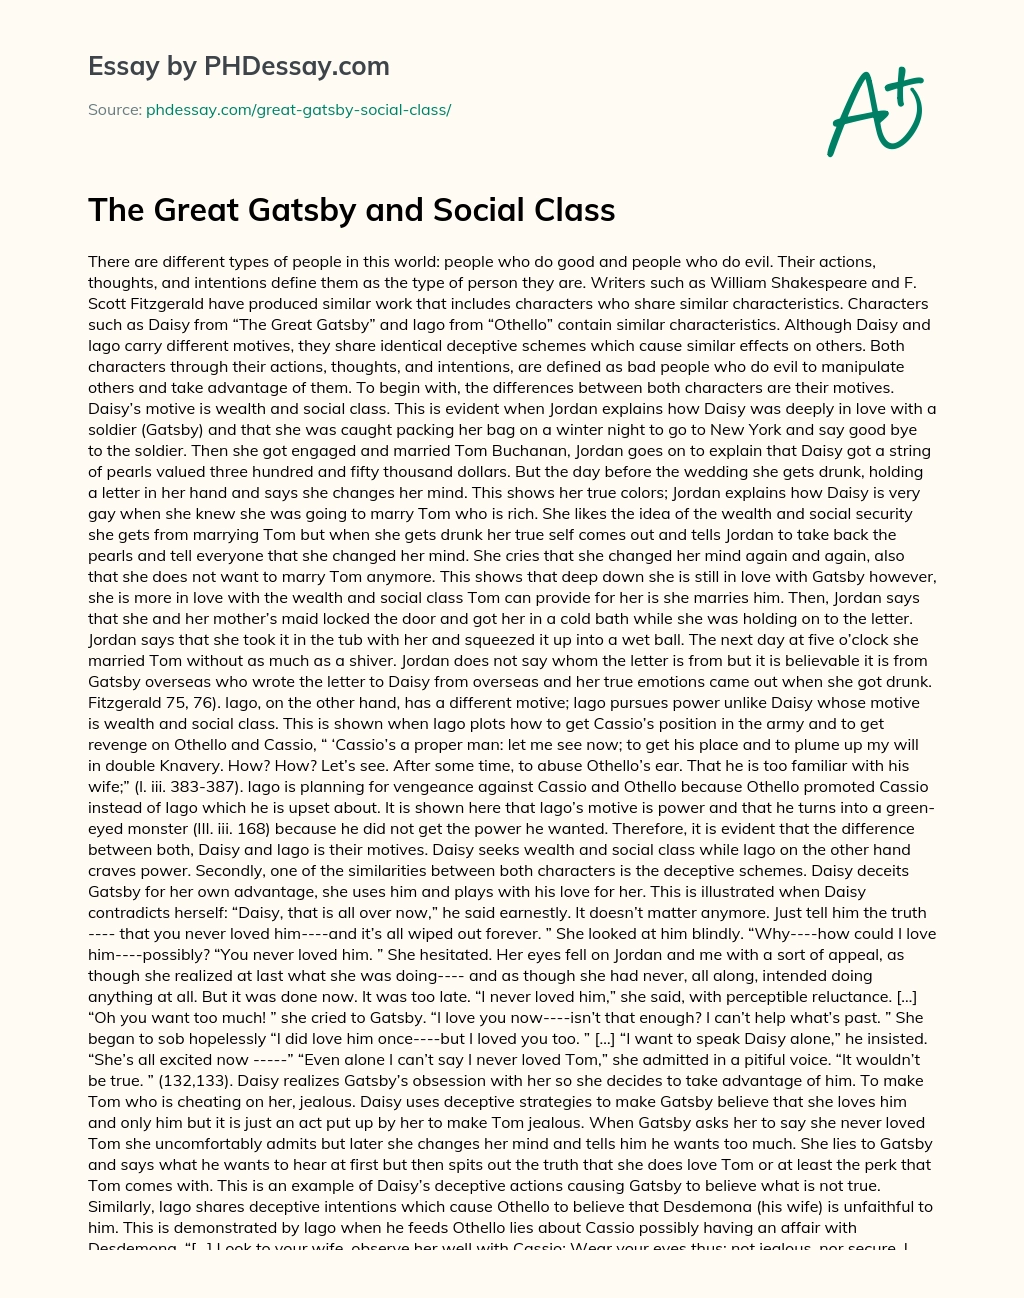 The Great Gatsby and Social Class essay